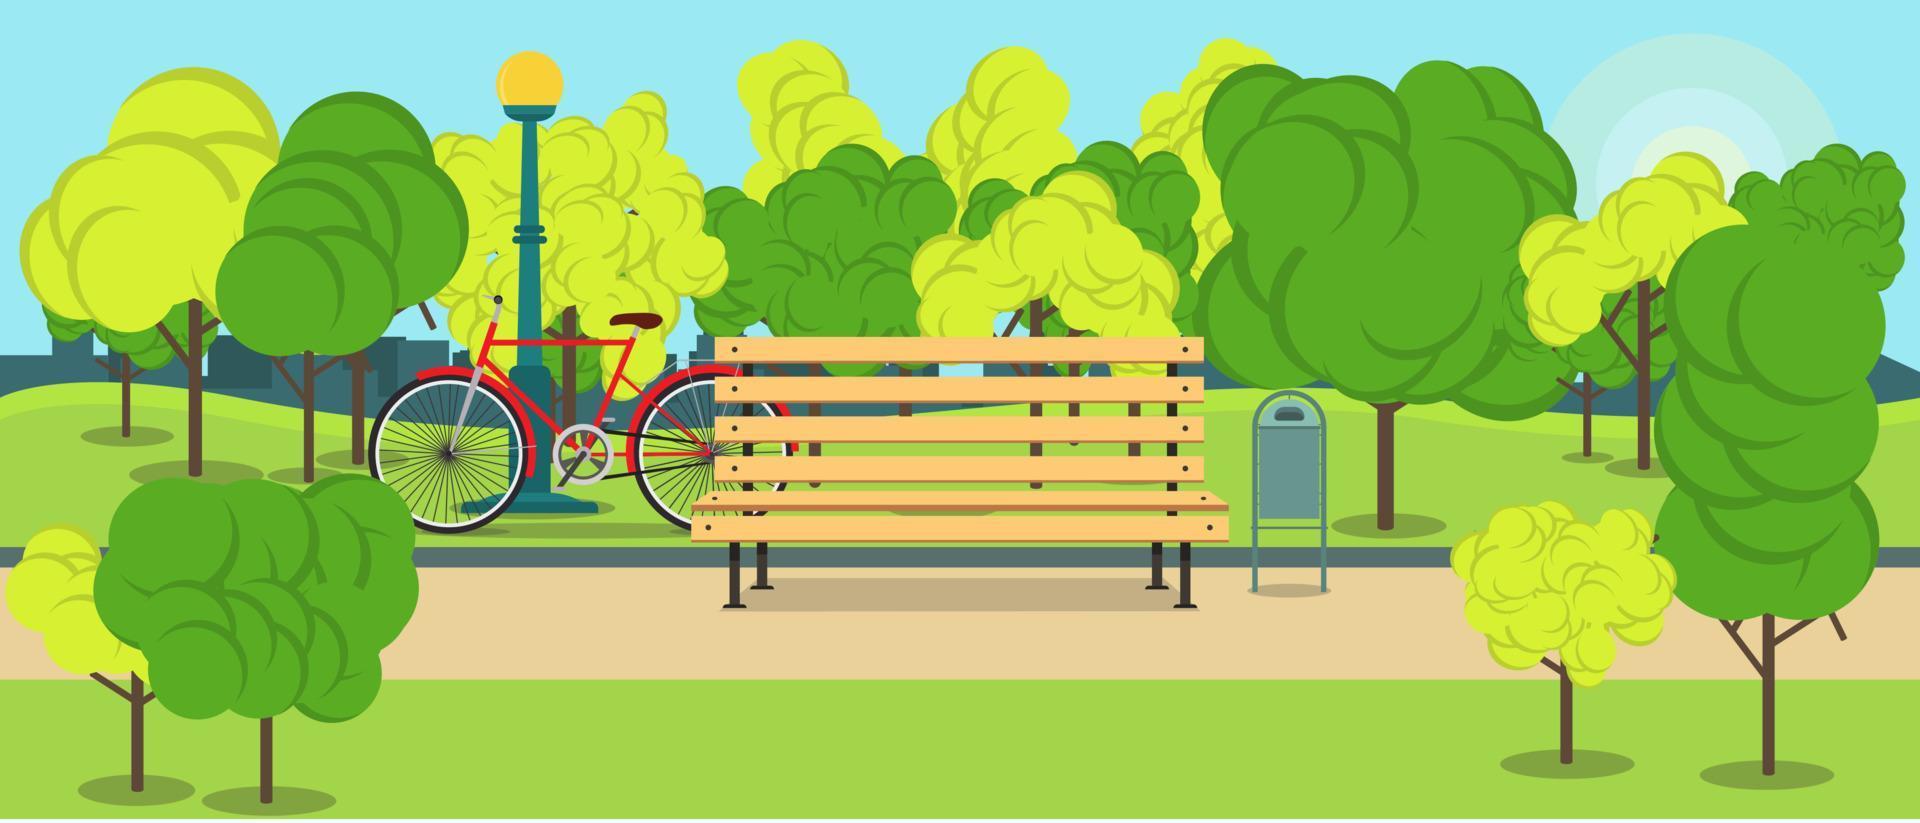 Park with bench,street light and red bicycle vector concept landscape flat illustration design